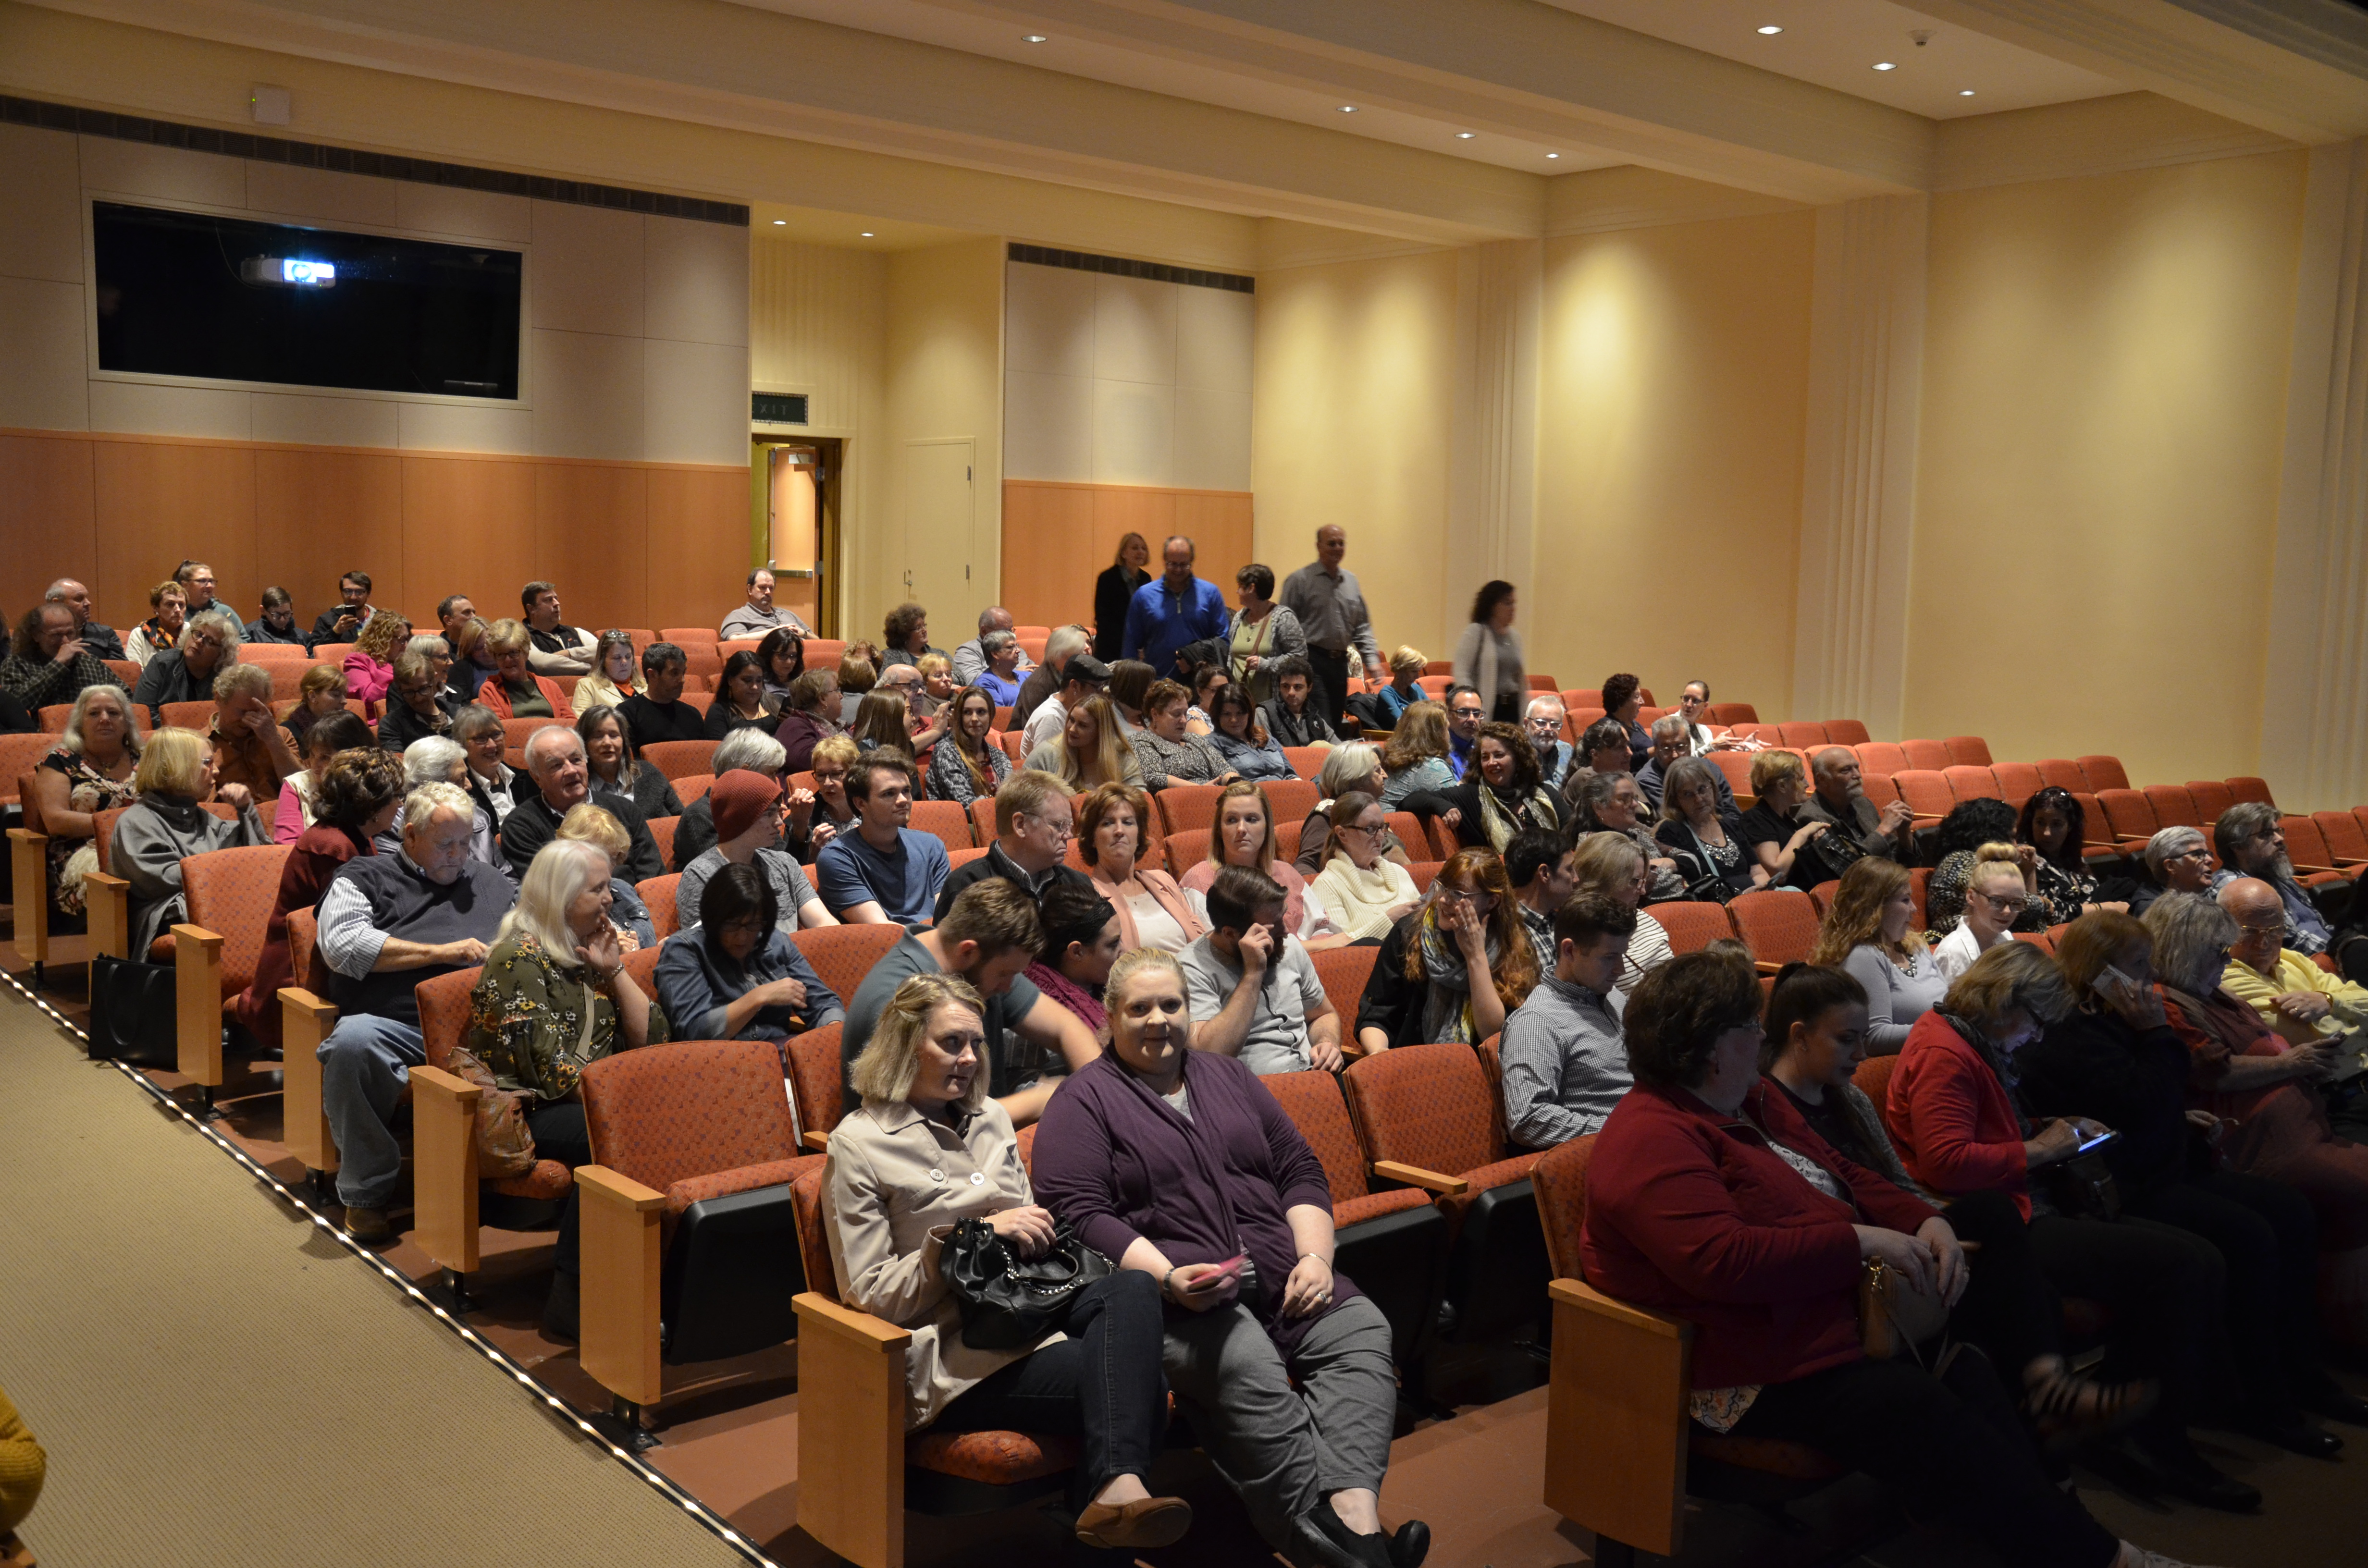 Visitors in the Fath Auditorium awaiting a presentation